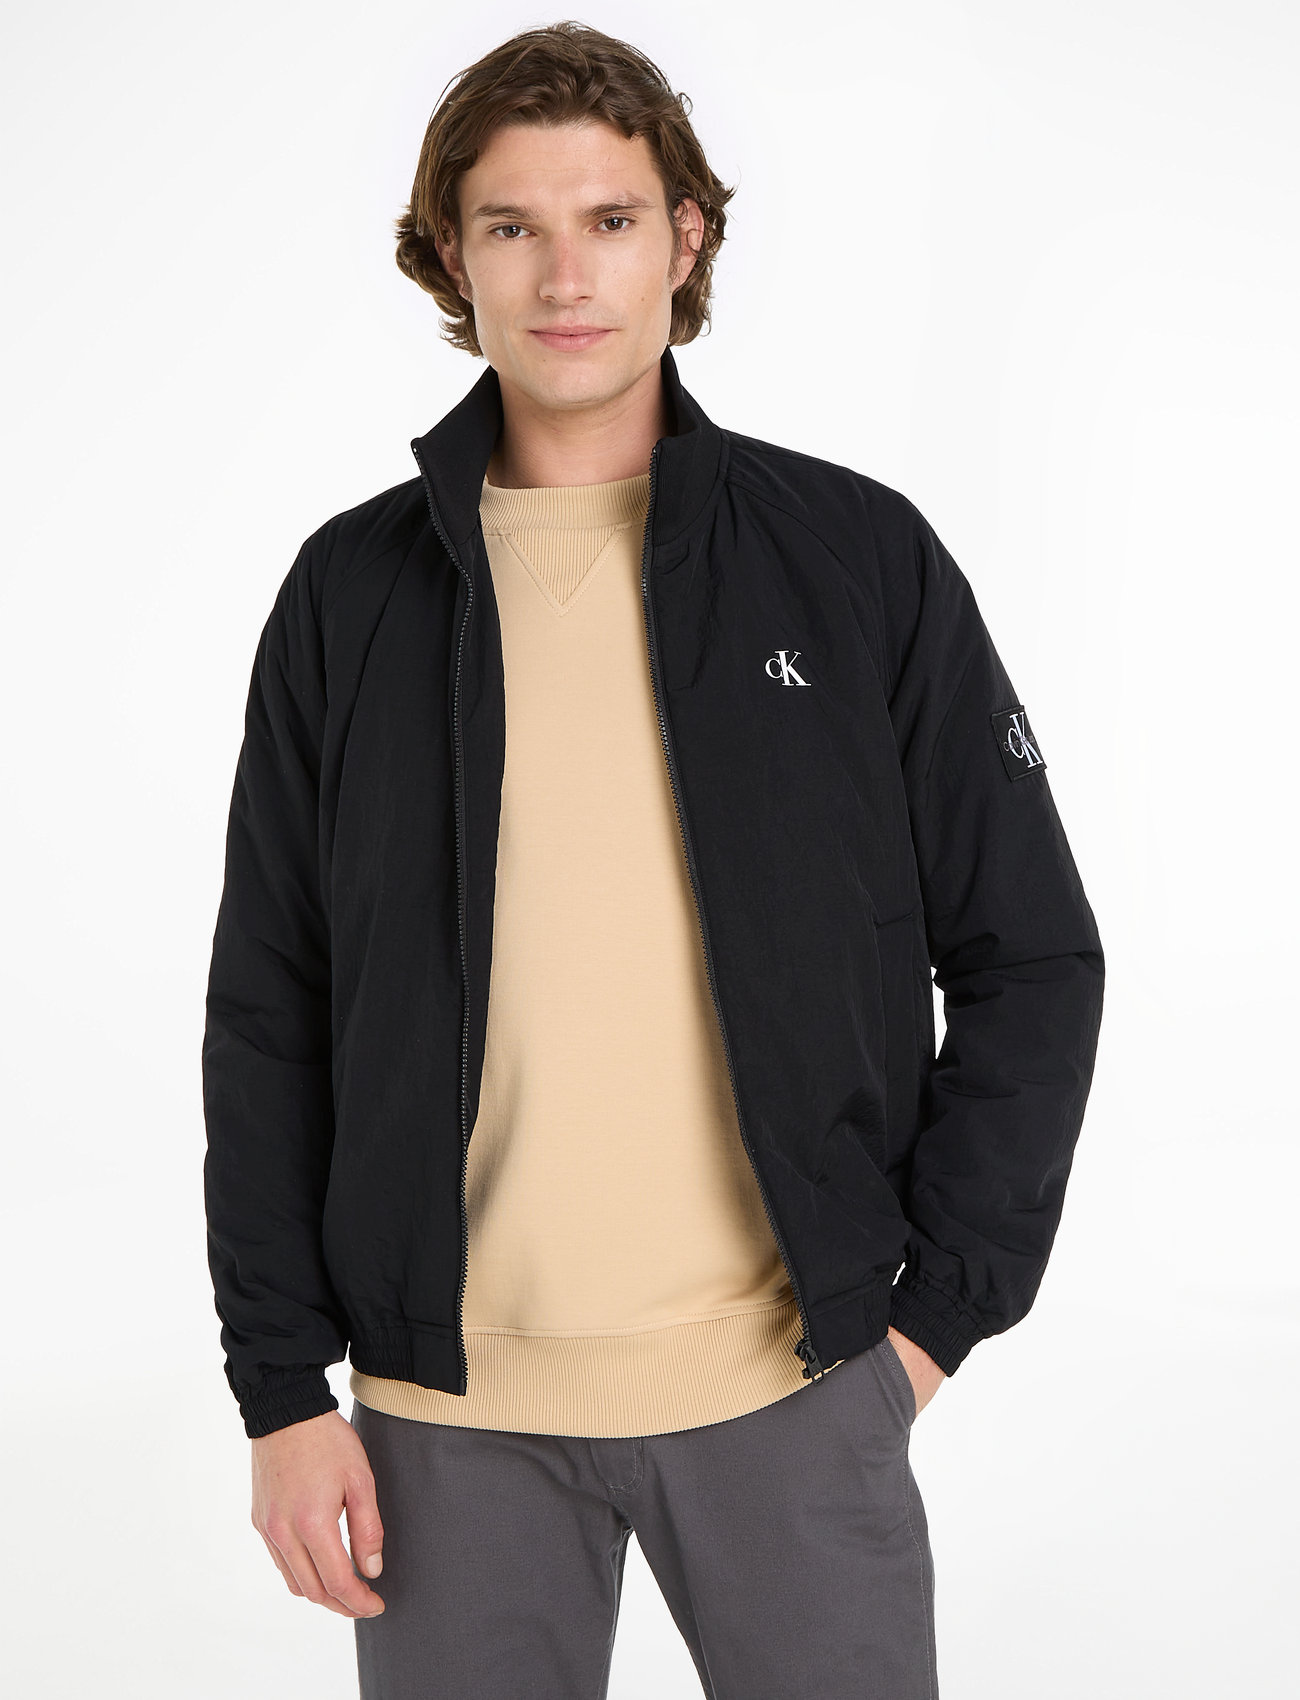 Calvin Klein Jeans Padded Fast from - Harrington at and Buy Klein Light 127.42 €. easy Boozt.com. Jackets Calvin online returns Jeans delivery